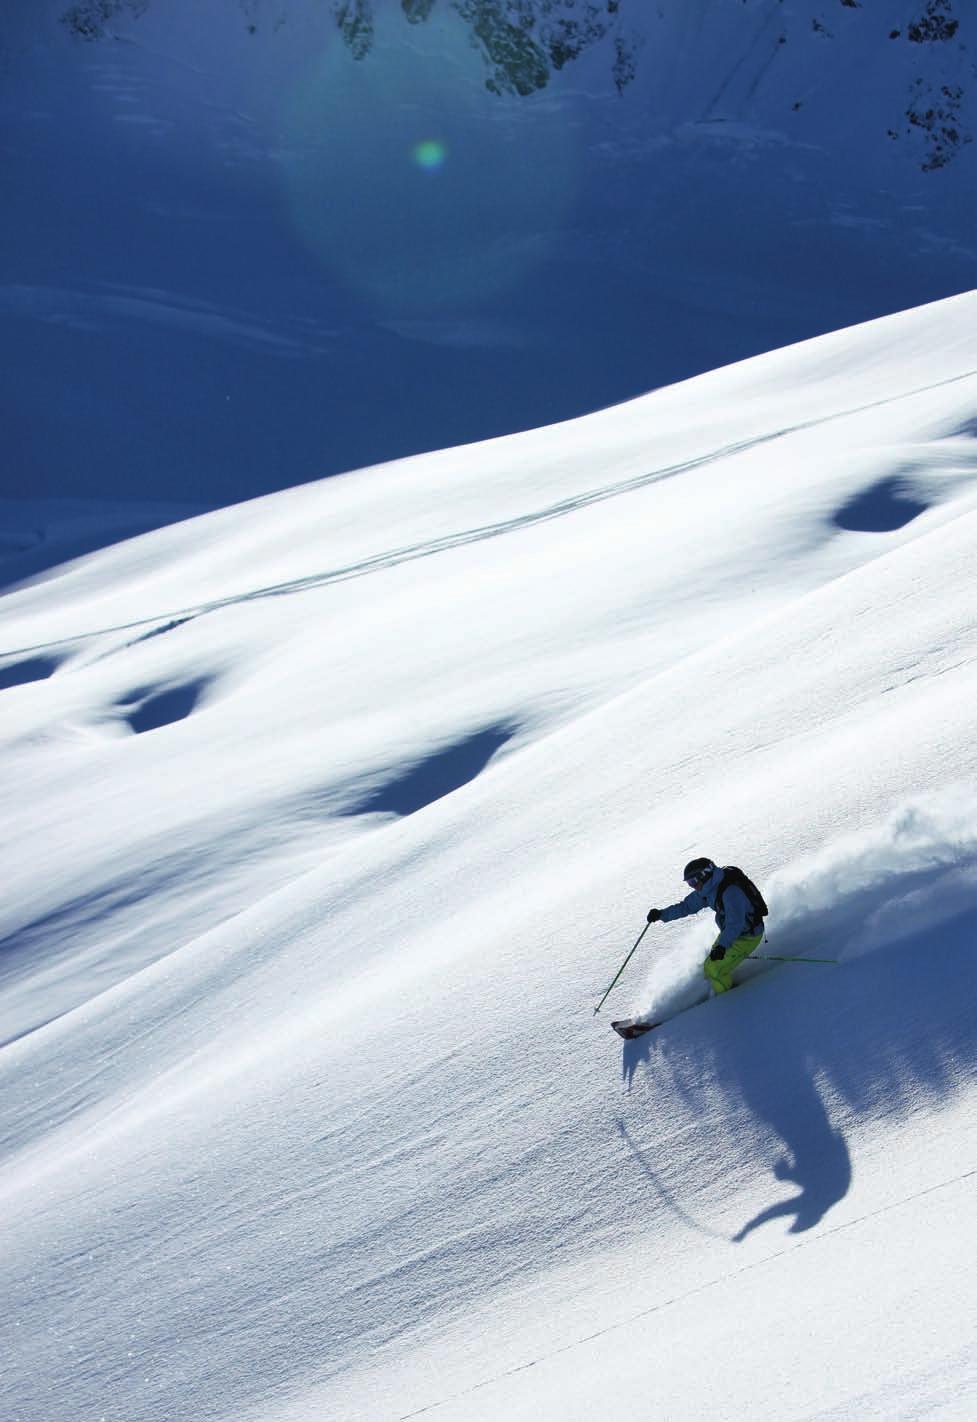 4 5 Skiing at Revelstoke For decades Revelstoke has been the exclusive retreat of the elite heliskiing community. Now it has broadened its appeal.